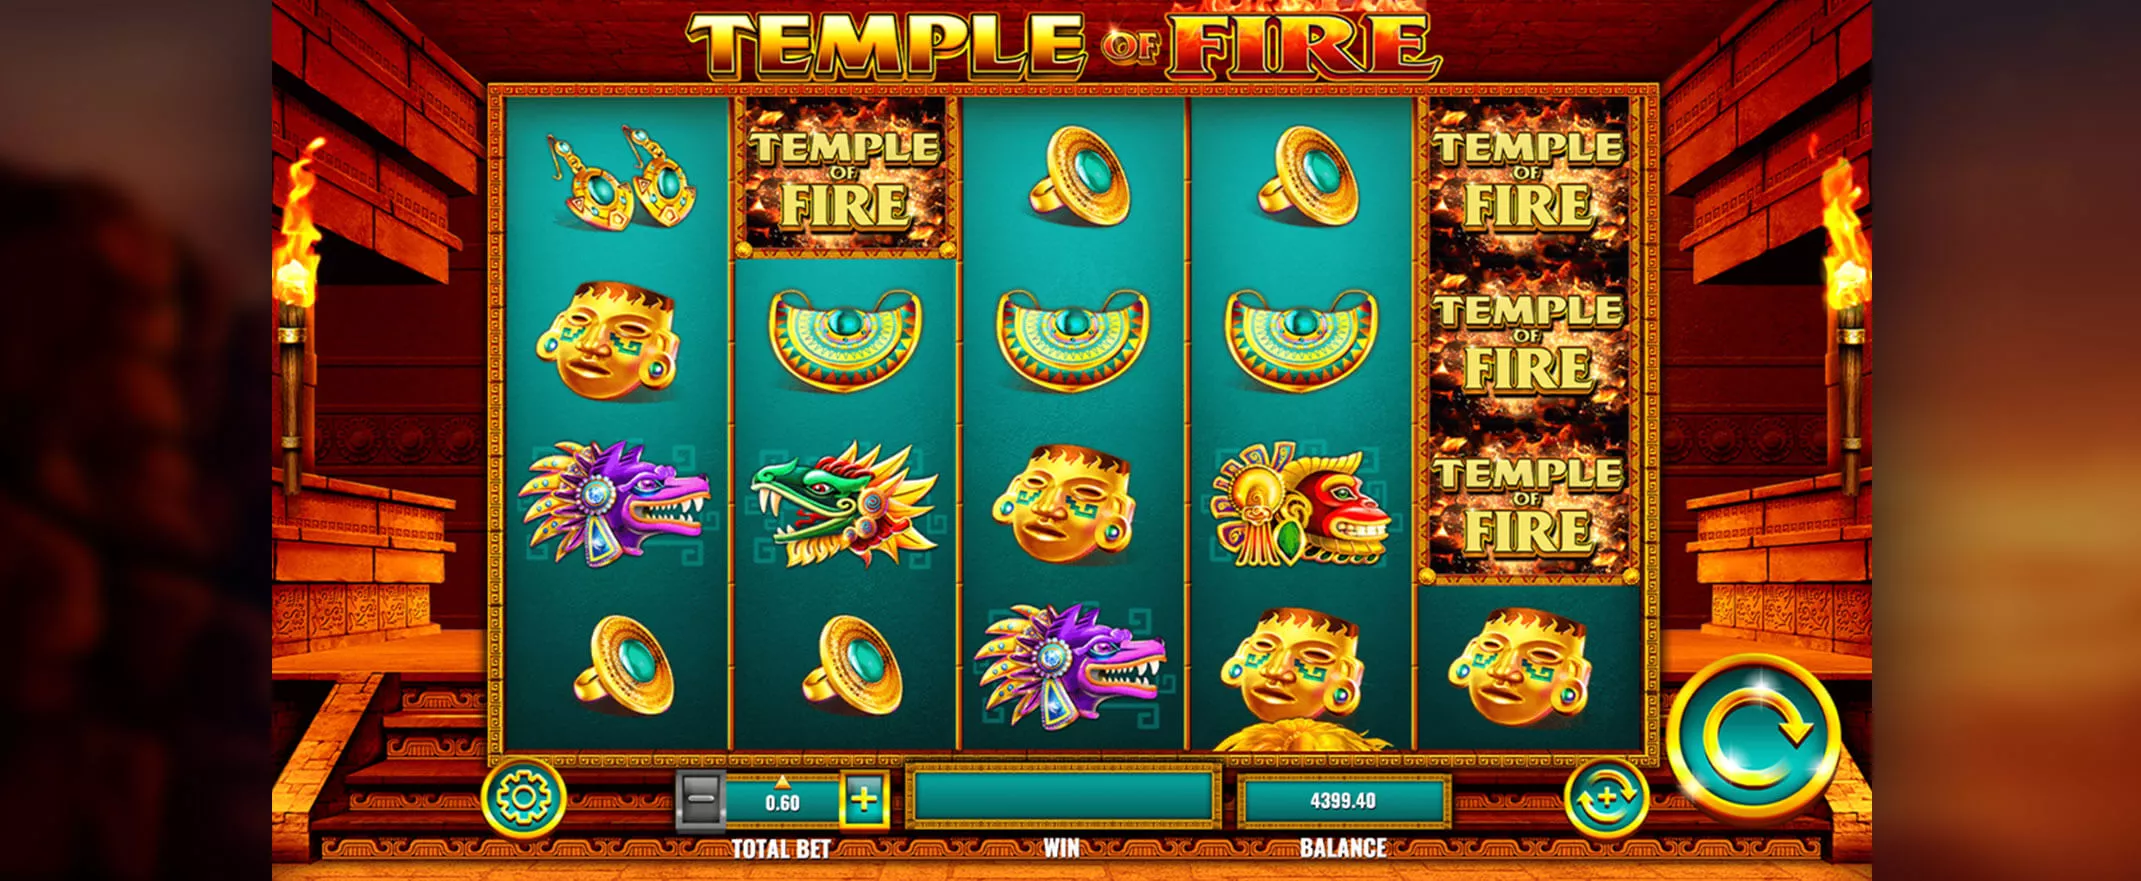 Temple of Fire slot screenshot of the reels